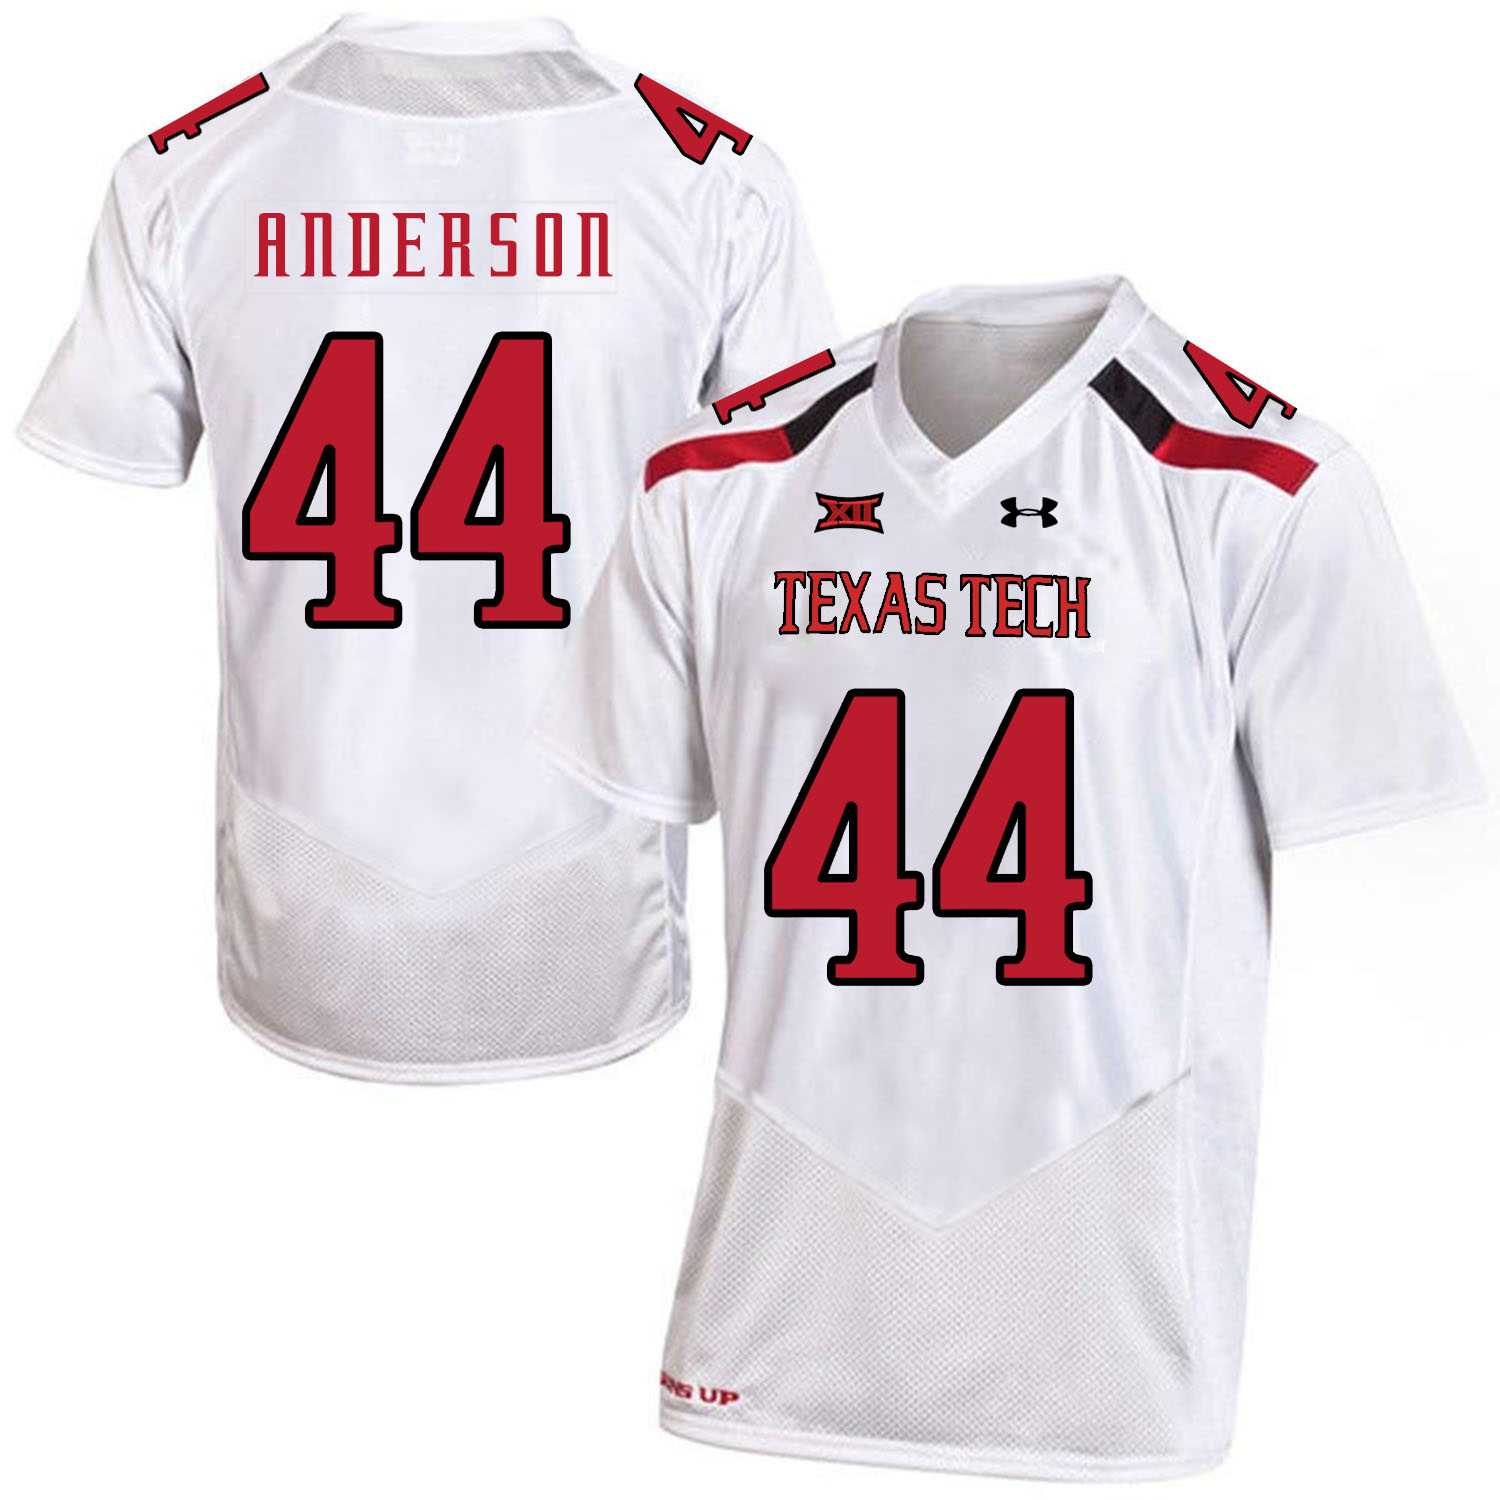 Texas Tech Red Raiders 44 Donny Anderson White College Football Jersey Dzhi